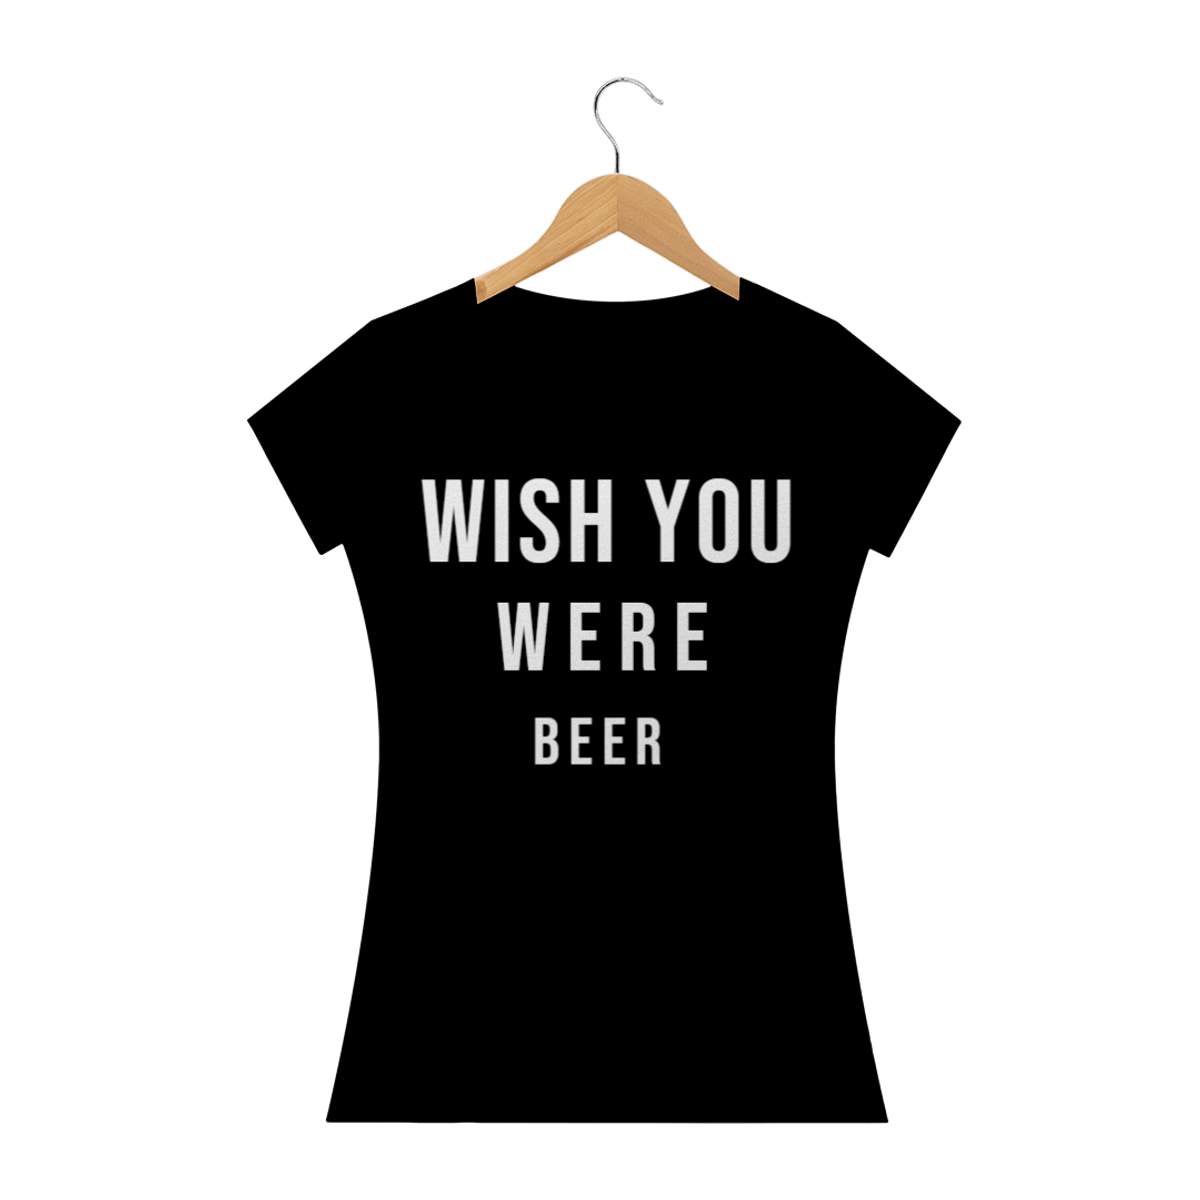 Nome do produtoBaby Long Wish You Were Beer